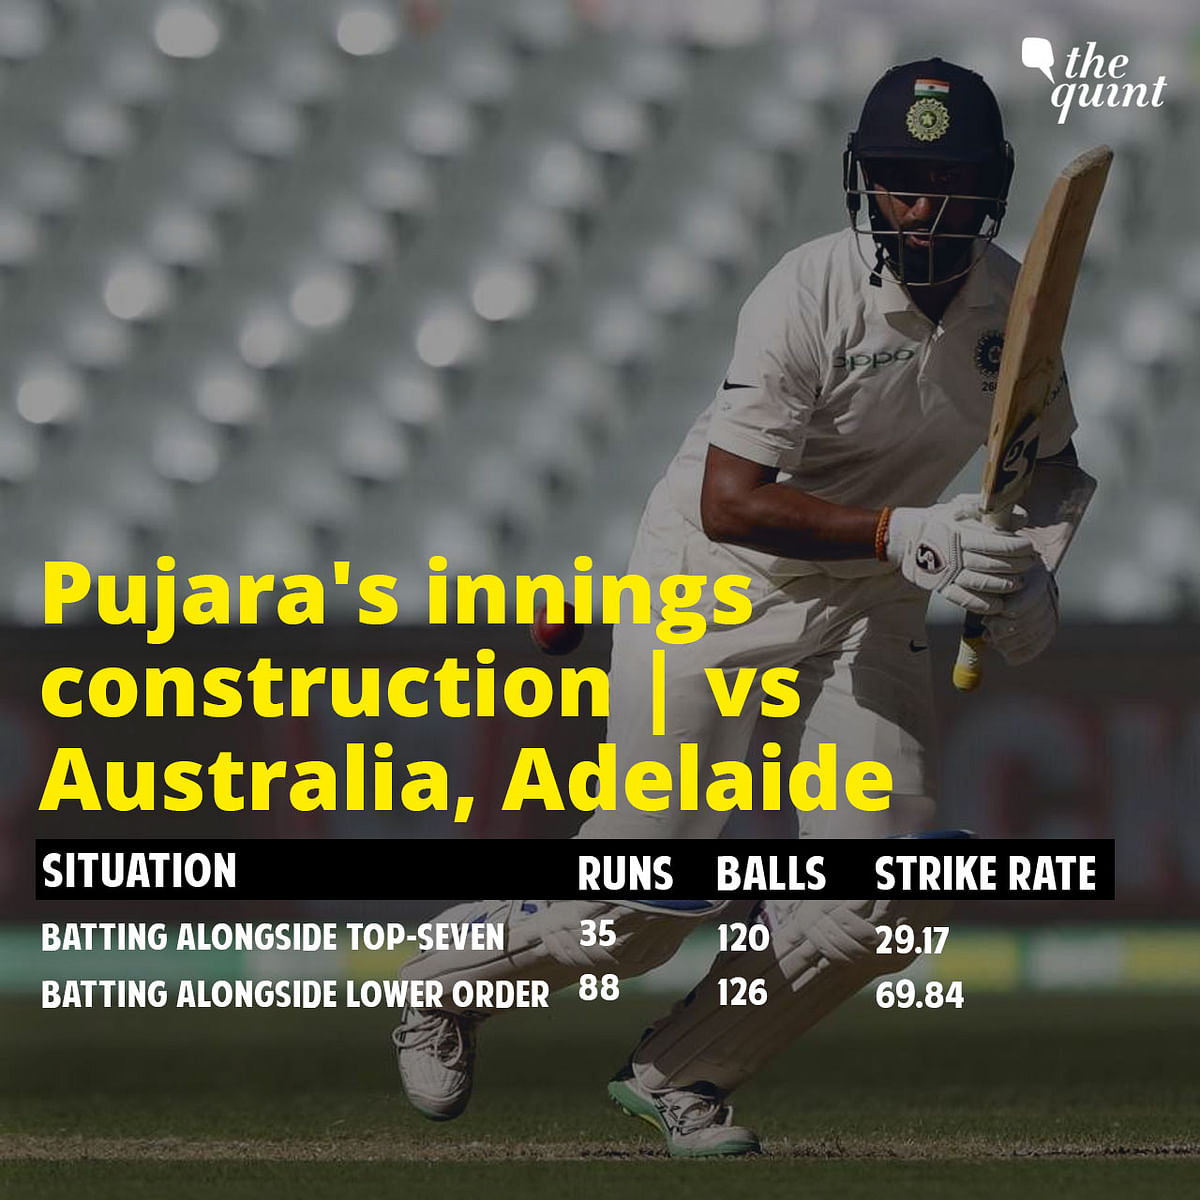 An Indian number three played a starring hand in a stellar victory at Adelaide for the second time in 15 years.